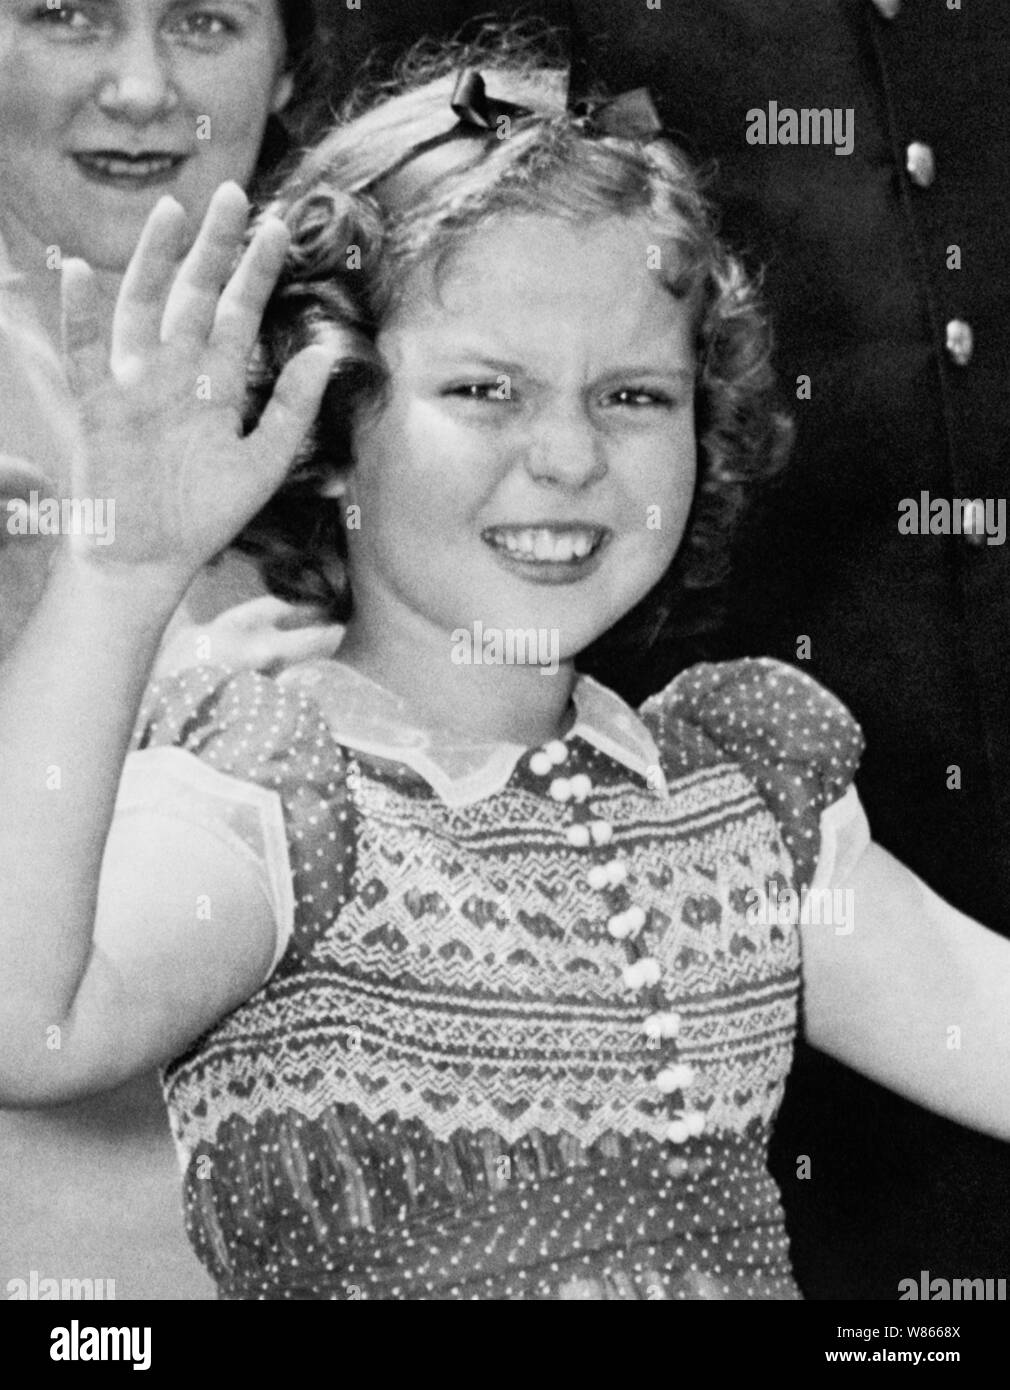 Vintage photo of American child film star Shirley Temple (1928 – 2014). The image was captured on June 24 1938 as the young actress waved to onlookers after she left the White House following a meeting with US President Franklin D Roosevelt. During their conversation she told the President how she had lost a tooth the night before when it fell out as she ate a sandwich. Stock Photo